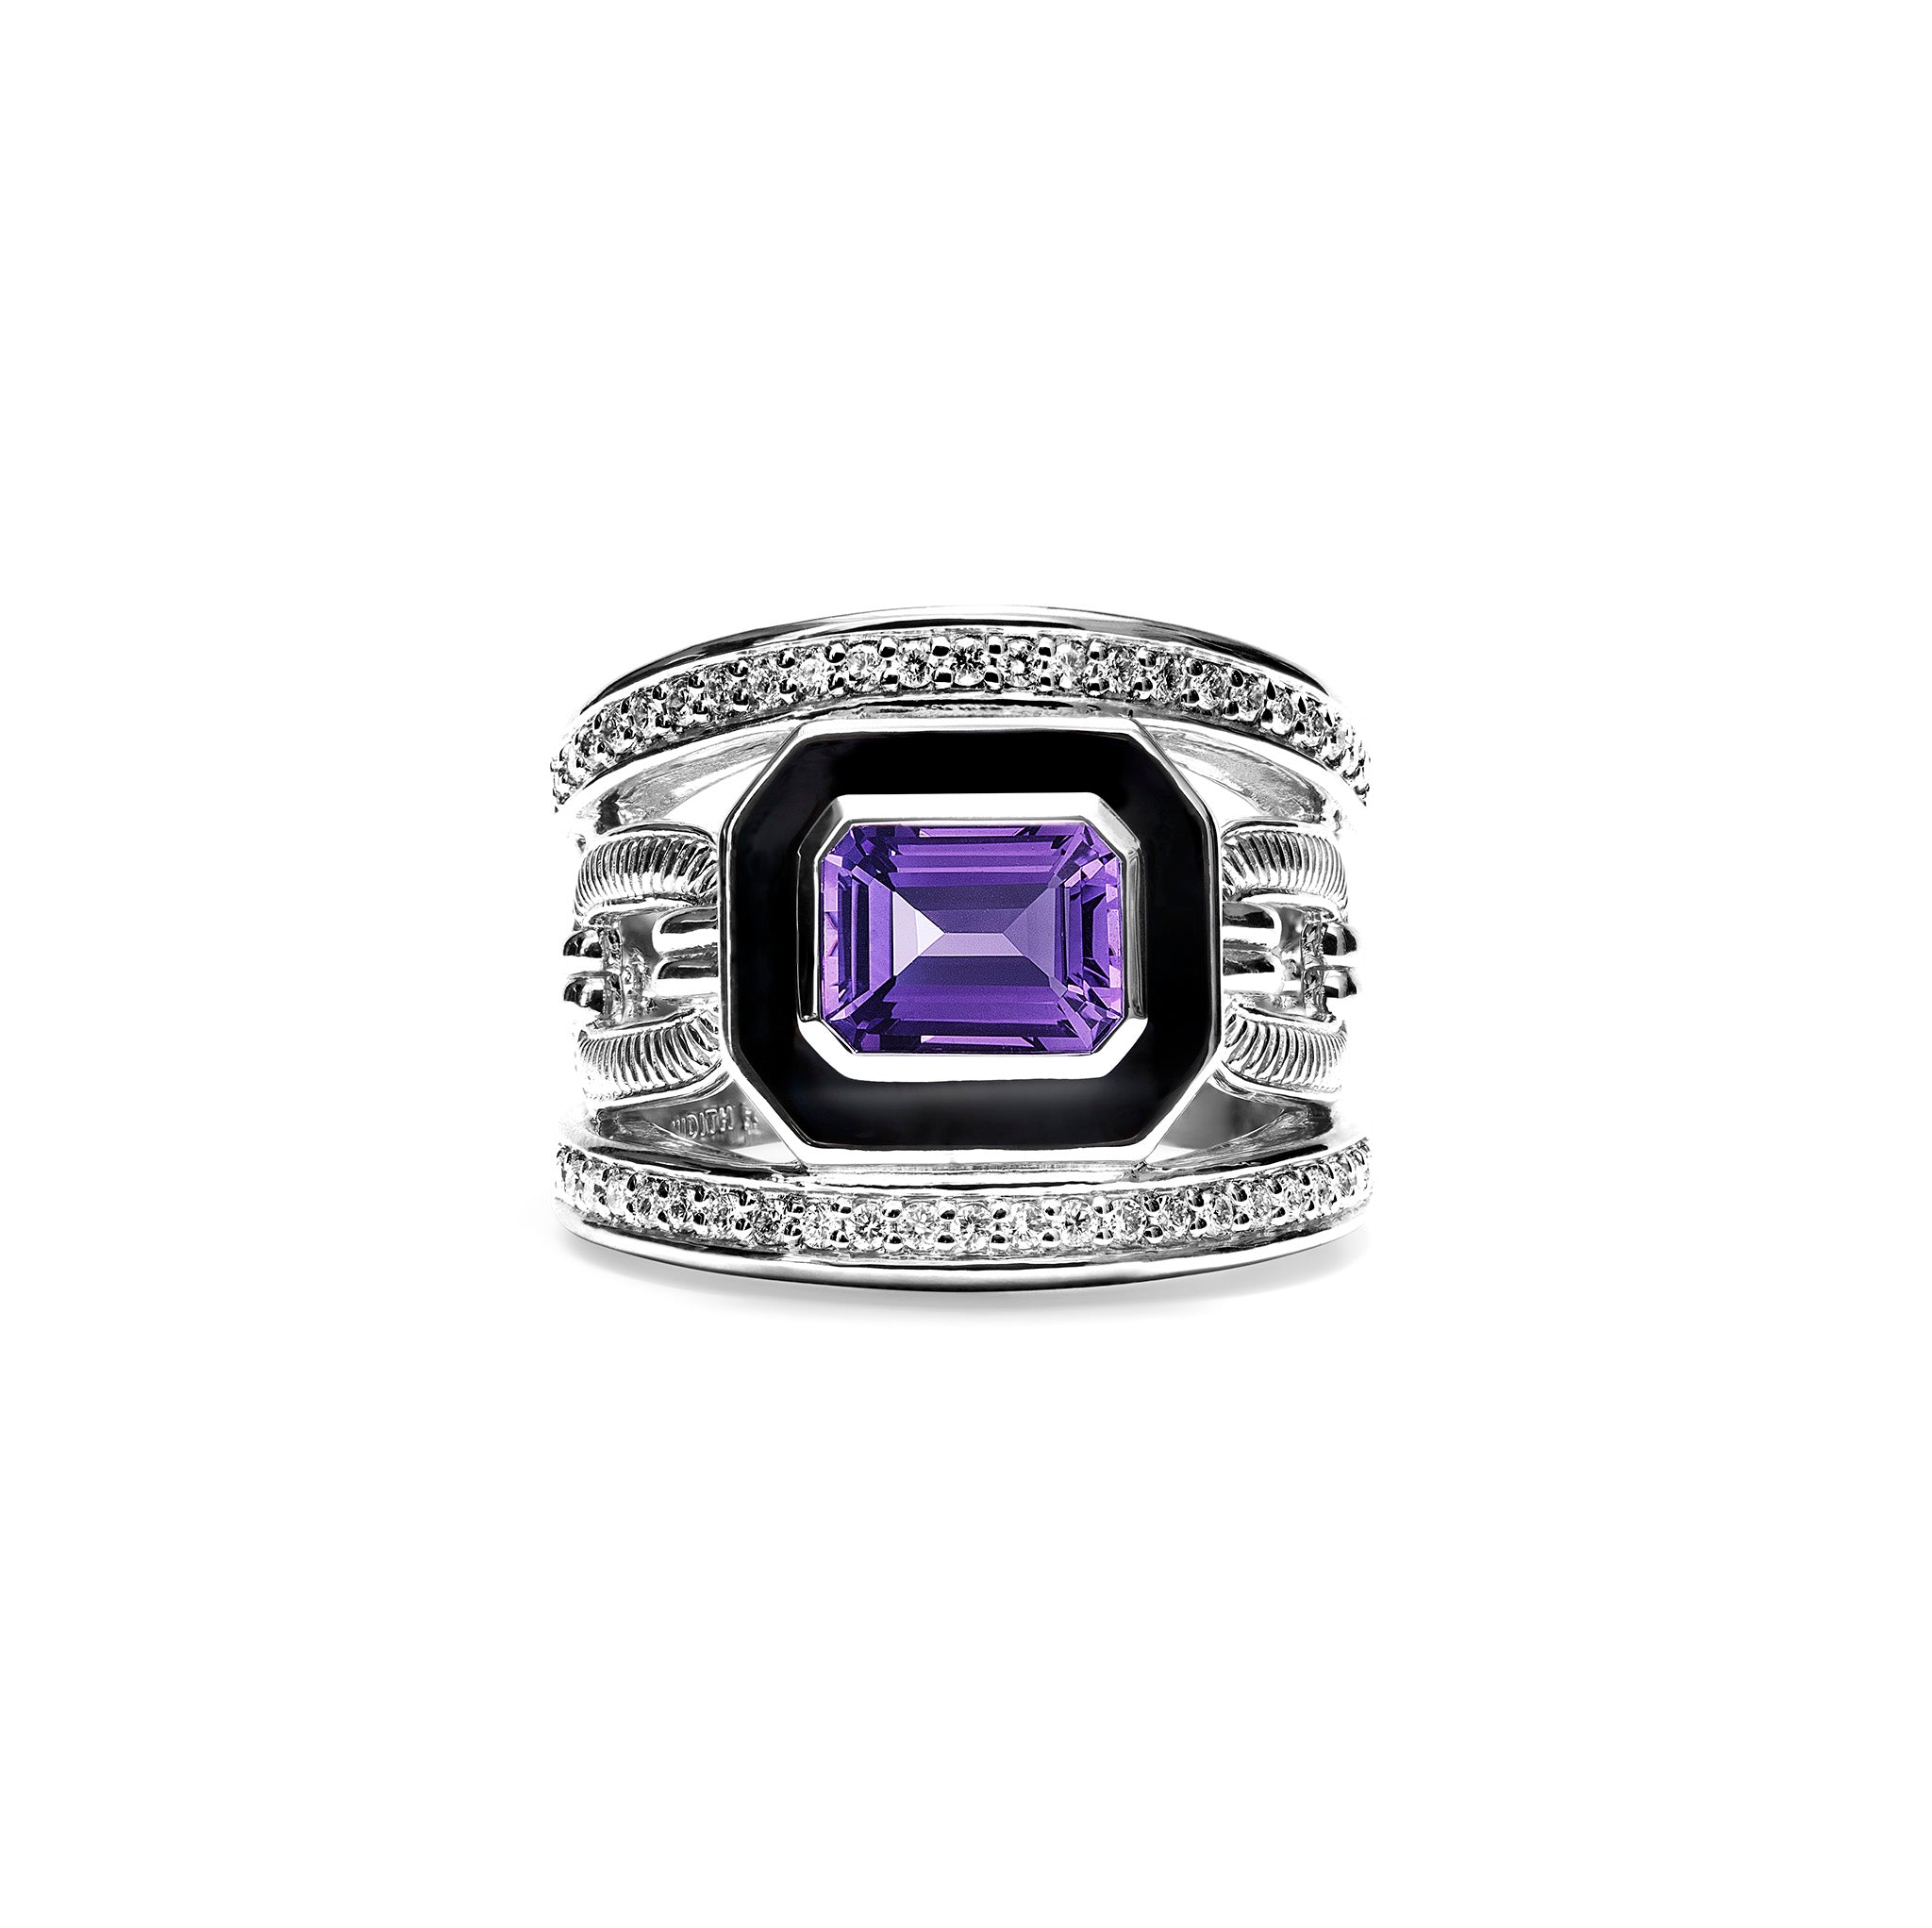 Adrienne Band Ring With Enamel, Amethyst And Diamonds